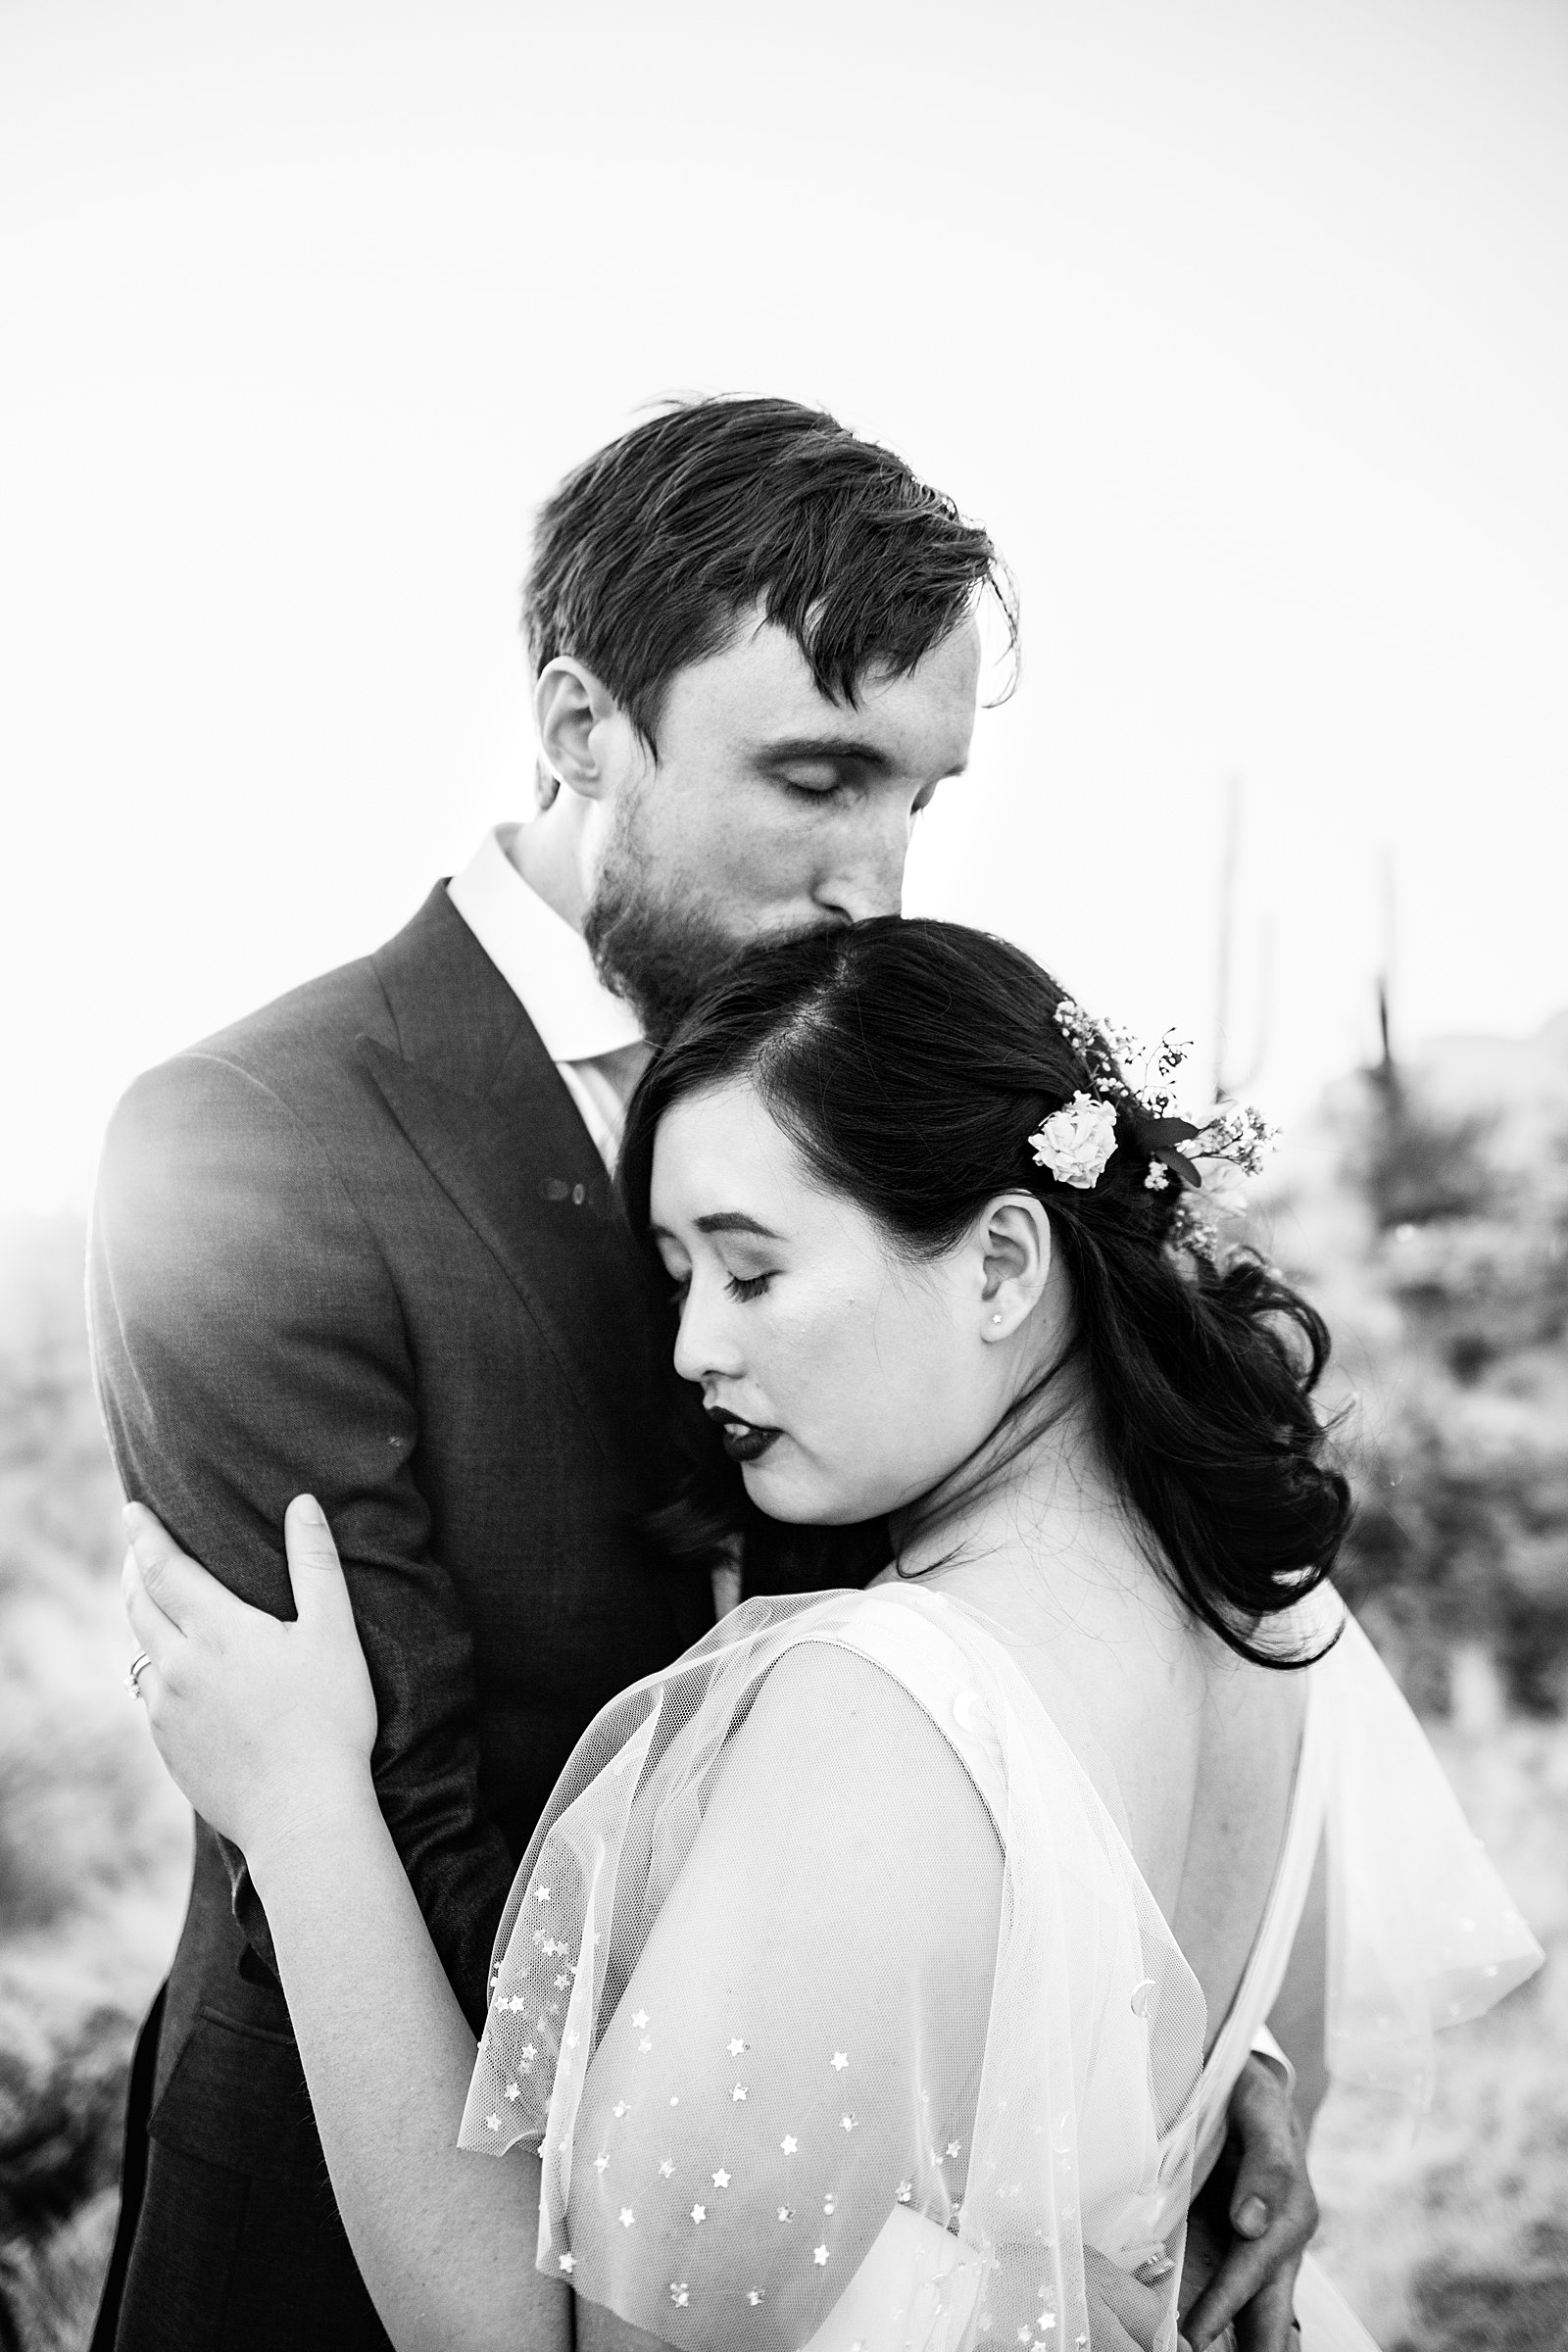 Bride and Groom share an intimate moment at their Superstition Mountain Cloth and Flame wedding by Arizona wedding photographer PMA Photography.